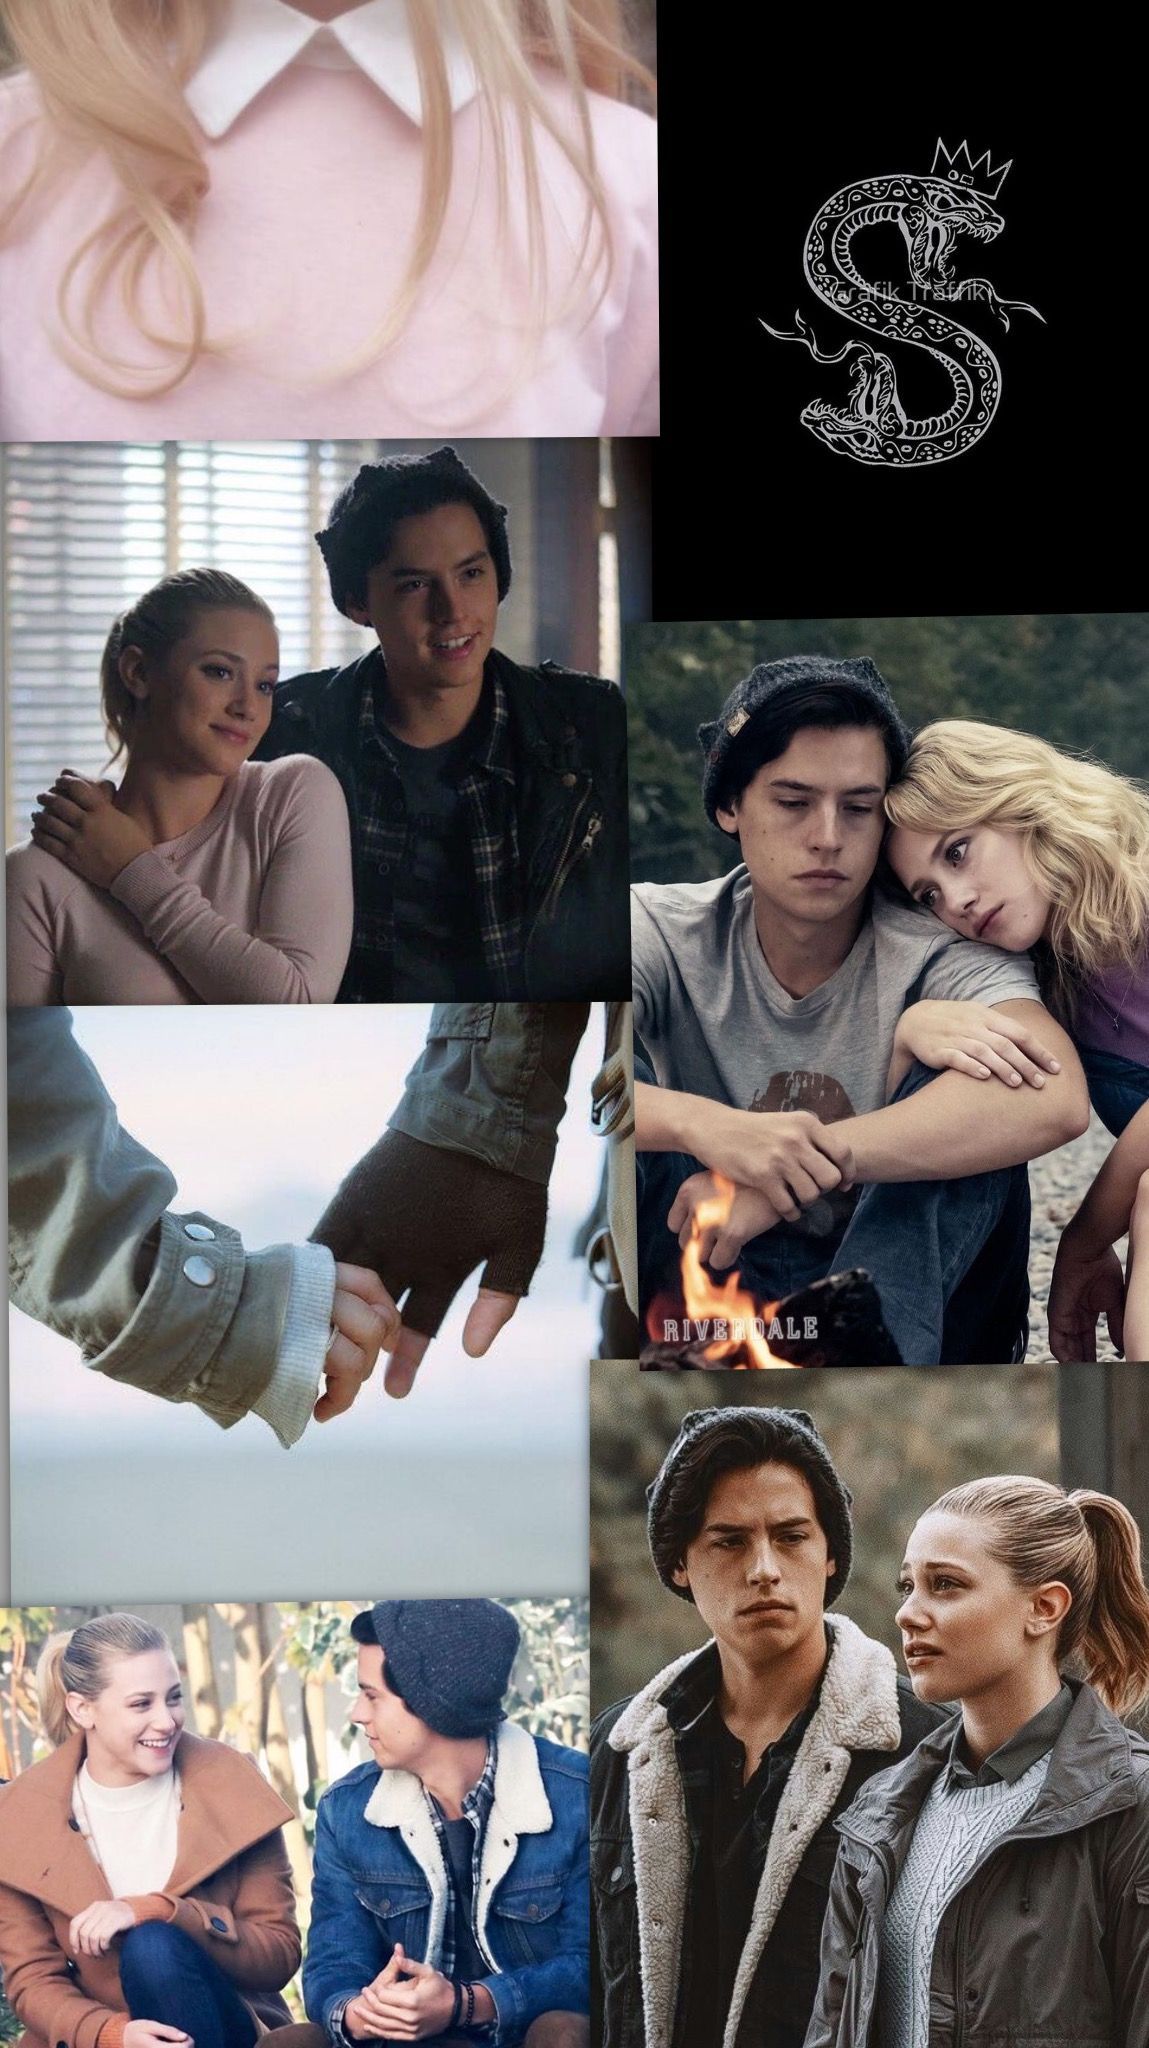 Free download Bughead Bughead Bughead riverdale Riverdale aesthetic [1149x2048] for your Desktop, Mobile & Tablet. Explore Jughead and Betty Wallpaper. Betty Boop Background, Betty Boop Desktop Wallpaper, Wallpaper Betty Boop